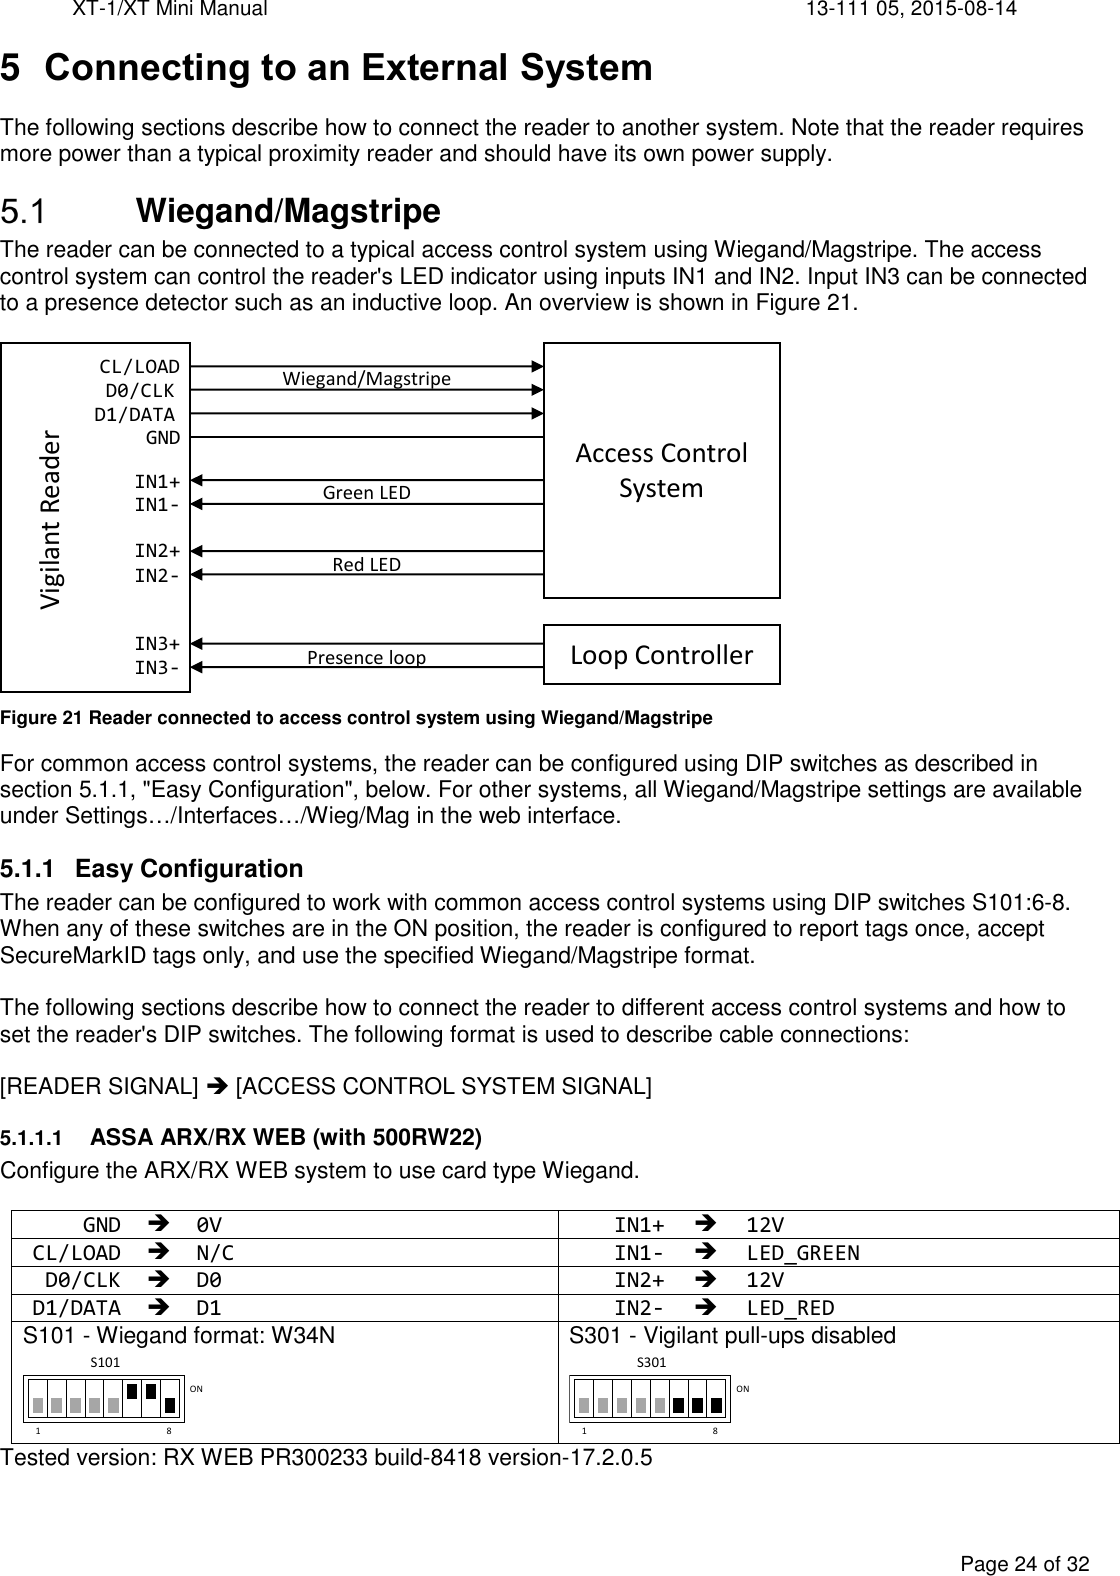 XT-1/XT Mini Manual     13-111 05, 2015-08-14  Page 24 of 32  5  Connecting to an External System The following sections describe how to connect the reader to another system. Note that the reader requires more power than a typical proximity reader and should have its own power supply.  Wiegand/Magstripe The reader can be connected to a typical access control system using Wiegand/Magstripe. The access control system can control the reader&apos;s LED indicator using inputs IN1 and IN2. Input IN3 can be connected to a presence detector such as an inductive loop. An overview is shown in Figure 21.   Figure 21 Reader connected to access control system using Wiegand/Magstripe For common access control systems, the reader can be configured using DIP switches as described in section 5.1.1, &quot;Easy Configuration&quot;, below. For other systems, all Wiegand/Magstripe settings are available under Settings…/Interfaces…/Wieg/Mag in the web interface.  5.1.1  Easy Configuration The reader can be configured to work with common access control systems using DIP switches S101:6-8. When any of these switches are in the ON position, the reader is configured to report tags once, accept SecureMarkID tags only, and use the specified Wiegand/Magstripe format.  The following sections describe how to connect the reader to different access control systems and how to set the reader&apos;s DIP switches. The following format is used to describe cable connections:  [READER SIGNAL]  [ACCESS CONTROL SYSTEM SIGNAL] 5.1.1.1 ASSA ARX/RX WEB (with 500RW22) Configure the ARX/RX WEB system to use card type Wiegand.  GND  0V IN1+  12V CL/LOAD  N/C IN1-  LED_GREEN D0/CLK  D0 IN2+  12V D1/DATA  D1 IN2-  LED_RED S101 - Wiegand format: W34N  S301 - Vigilant pull-ups disabled  Tested version: RX WEB PR300233 build-8418 version-17.2.0.5 GNDCL/LOADD0/CLKD1/DATAIN1+IN1-IN2+IN2-Wiegand/MagstripeGreen LEDRed LEDIN3+IN3- Presence loopVigilant ReaderAccess Control SystemLoop Controller1 8ONS1011 8ONS301